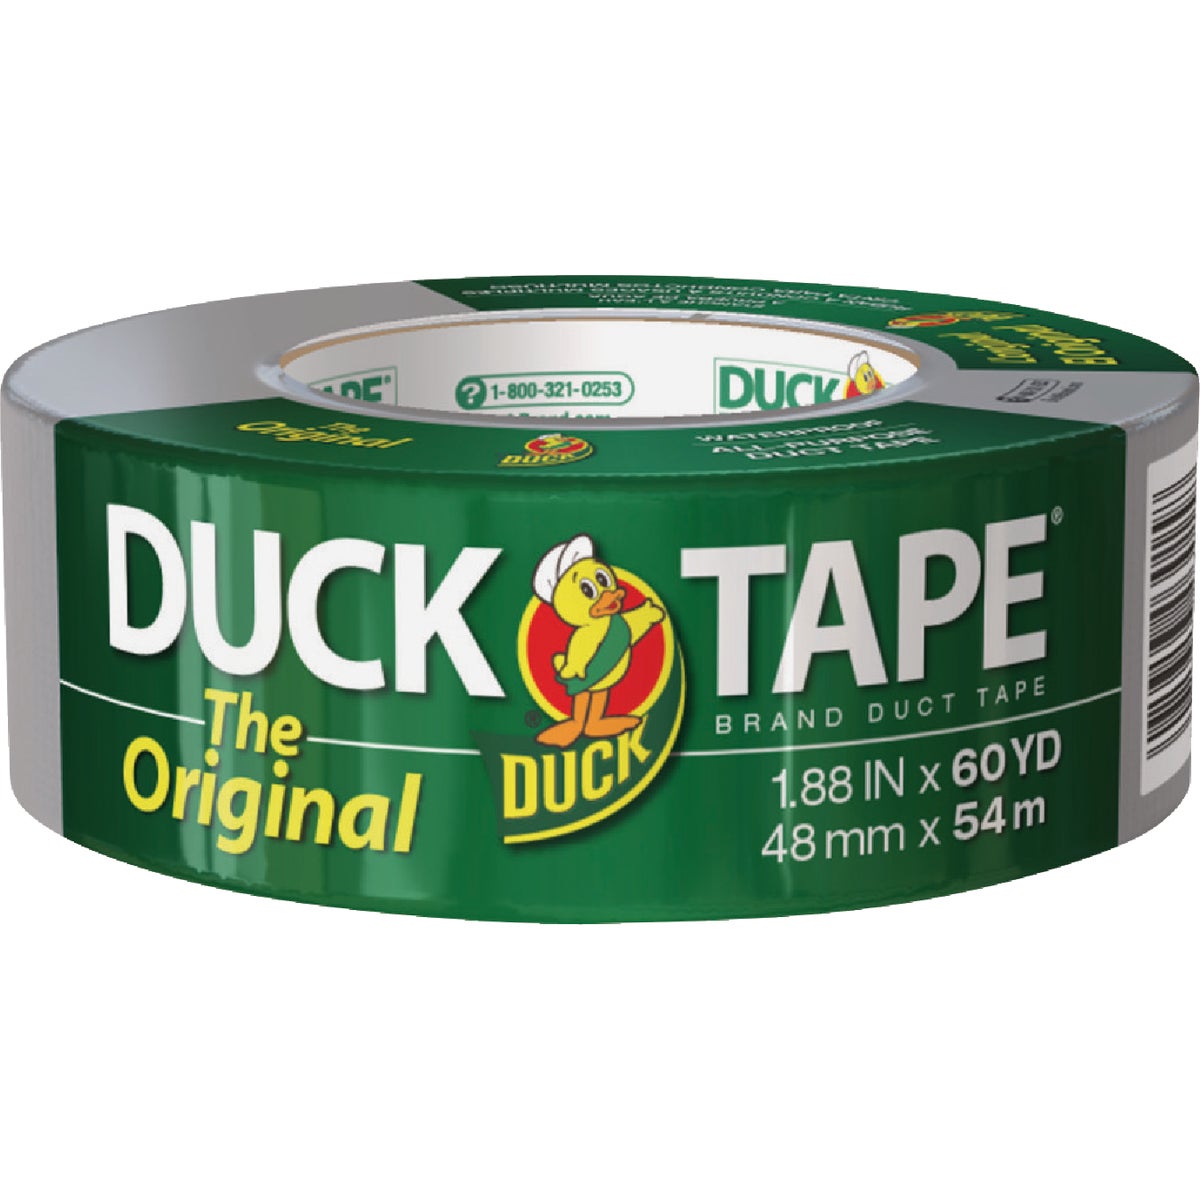 Item 401827, All-Purpose Original Strength Duck Tape is recommended for everyday 